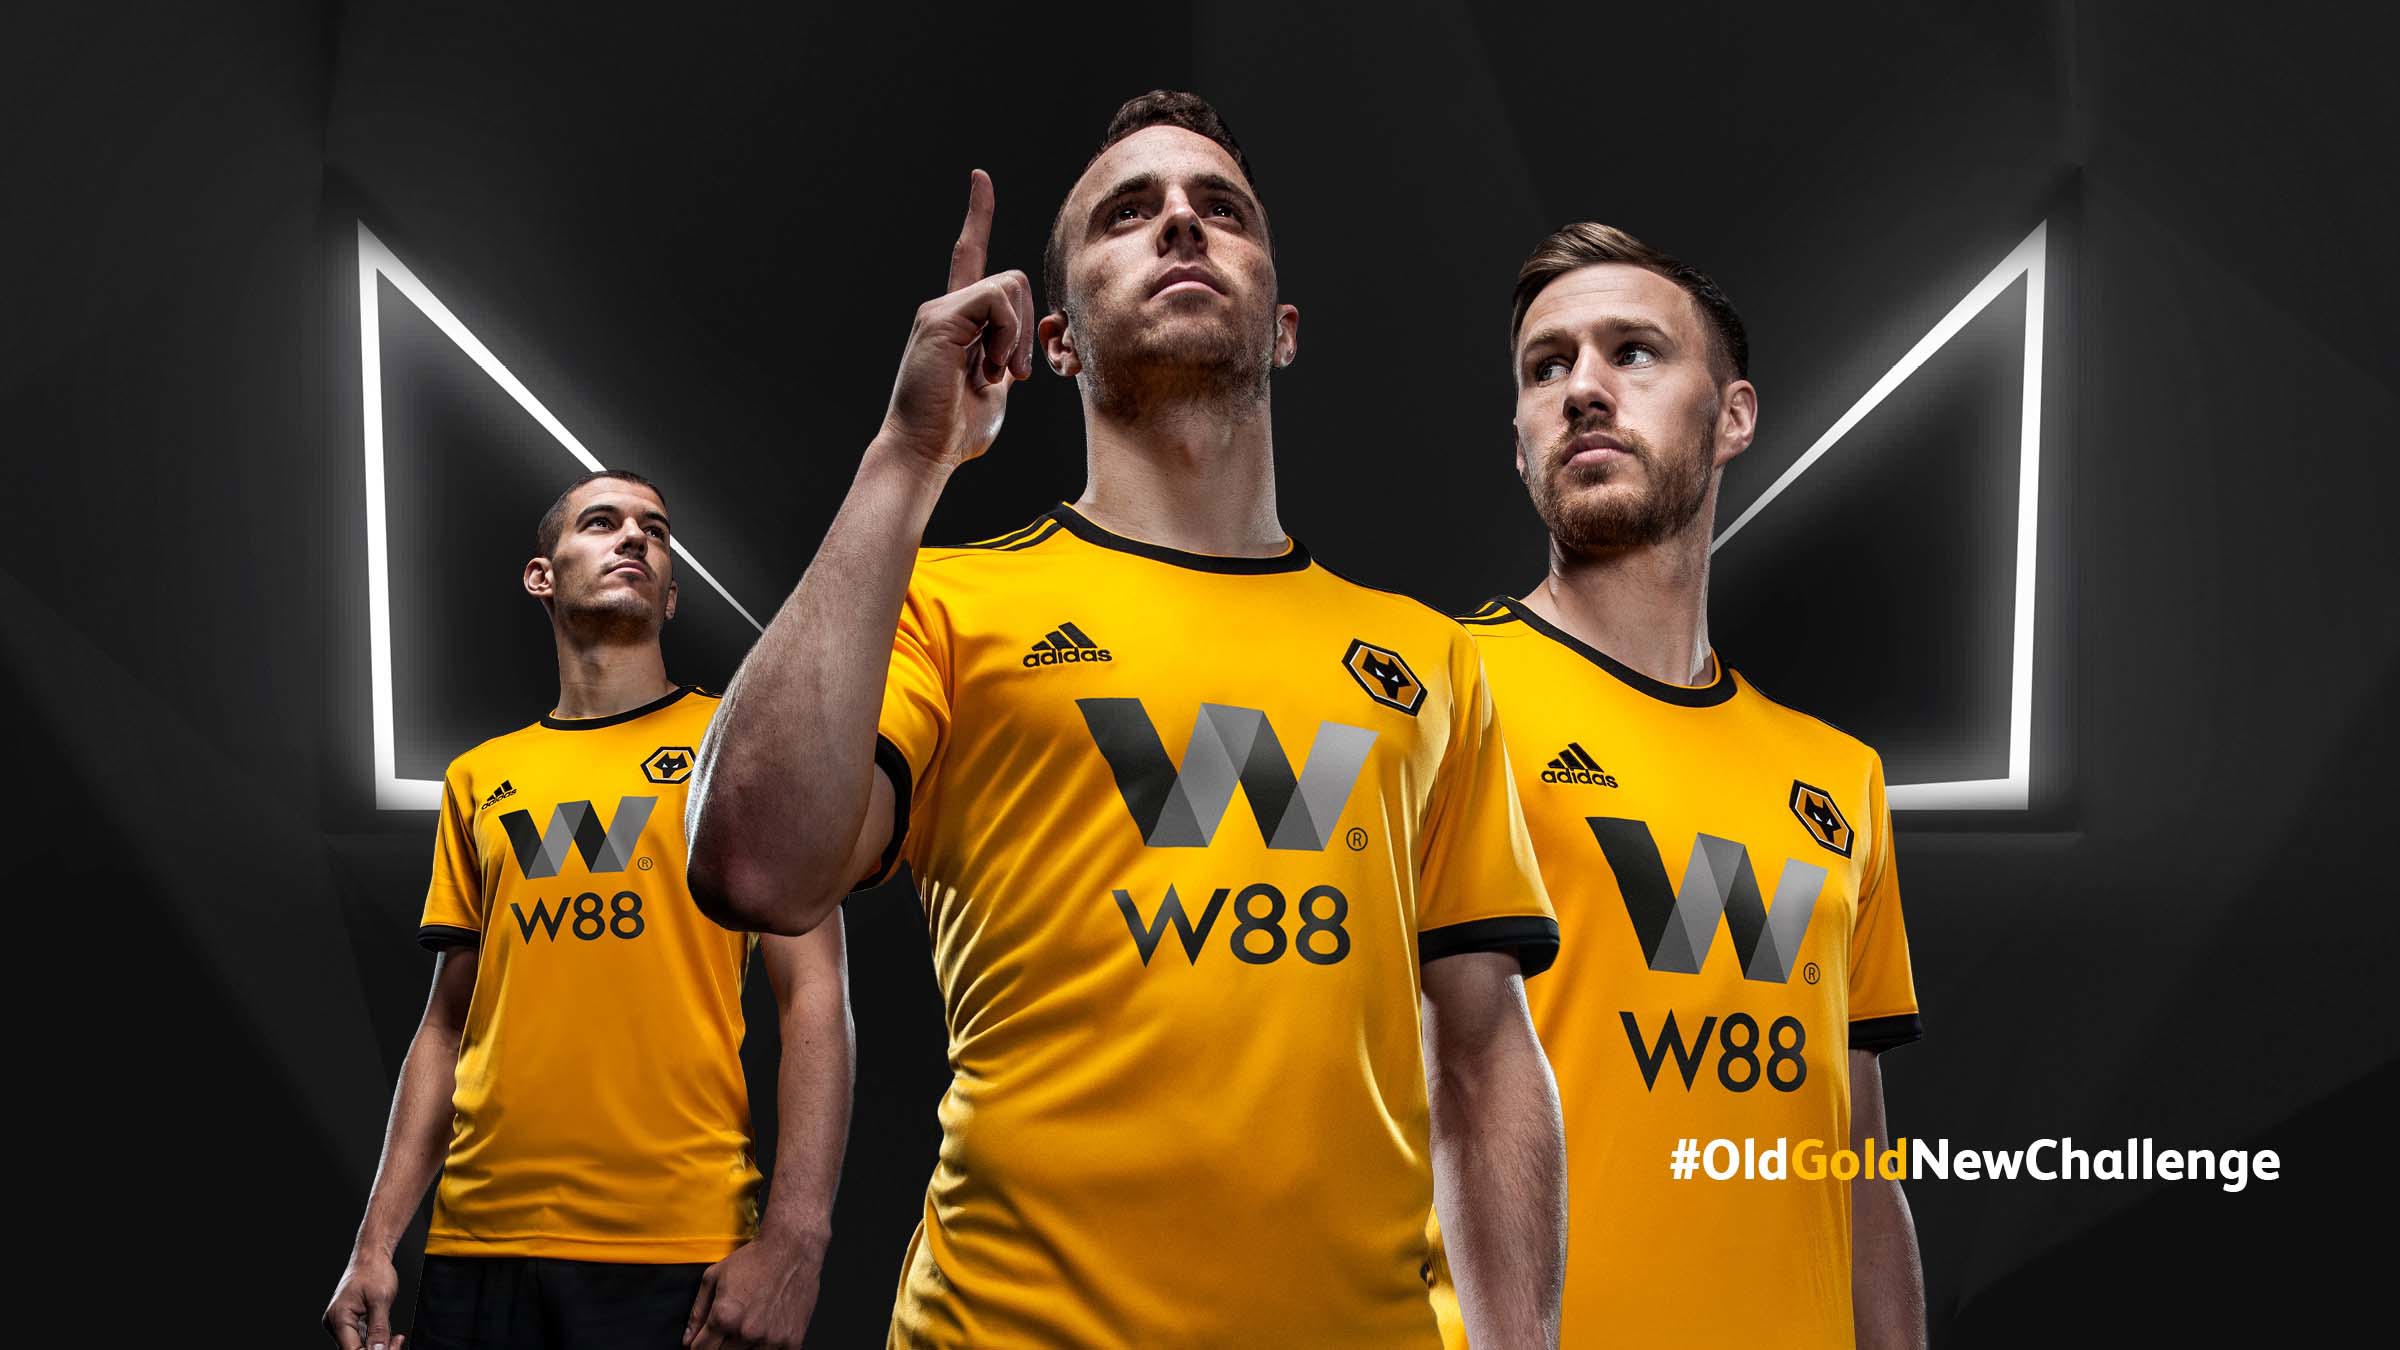 wolves fc jersey